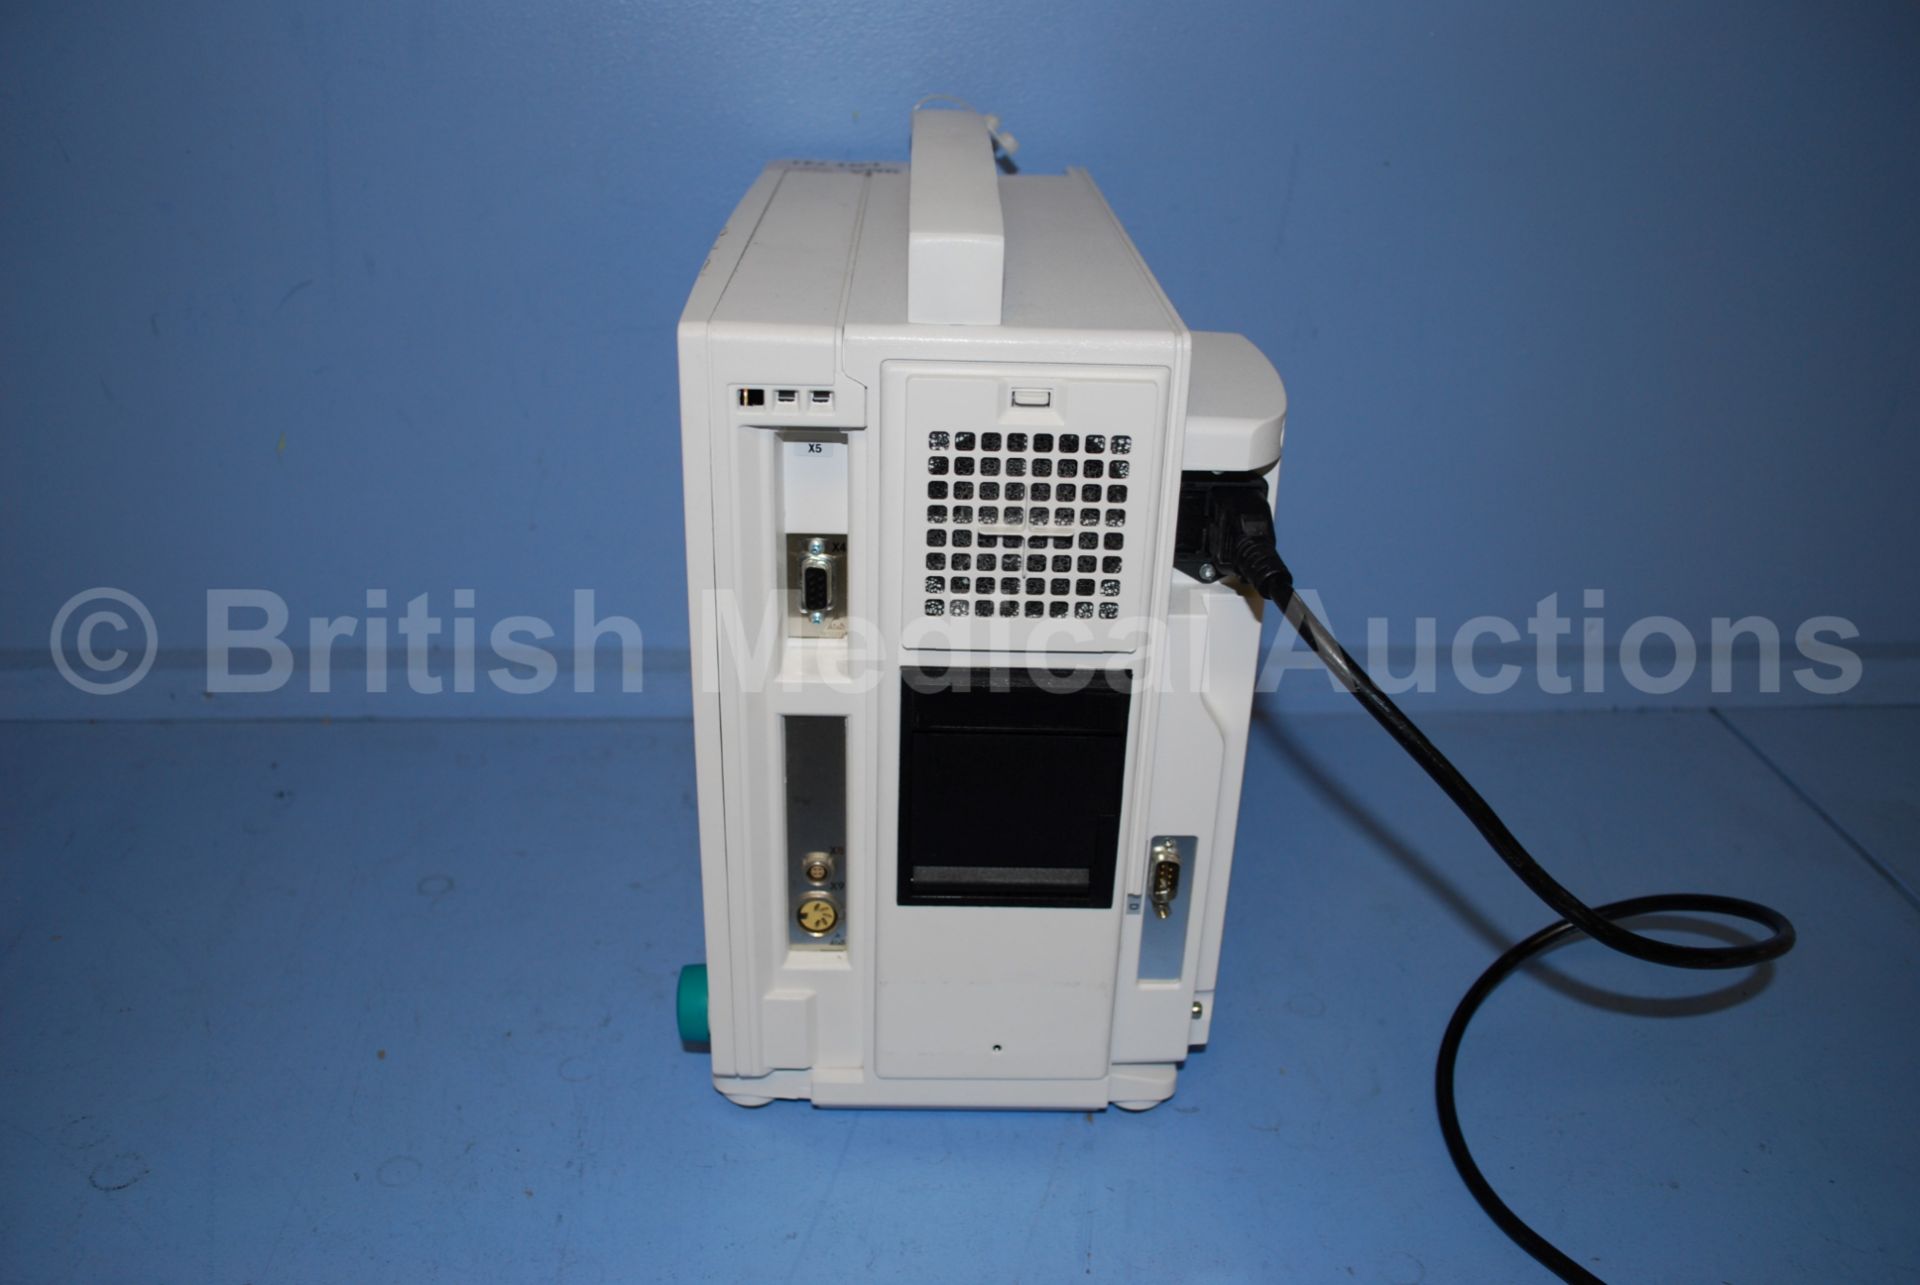 Datex Ohmeda S/5 Compact Anaesthesia Monitor with - Image 3 of 6